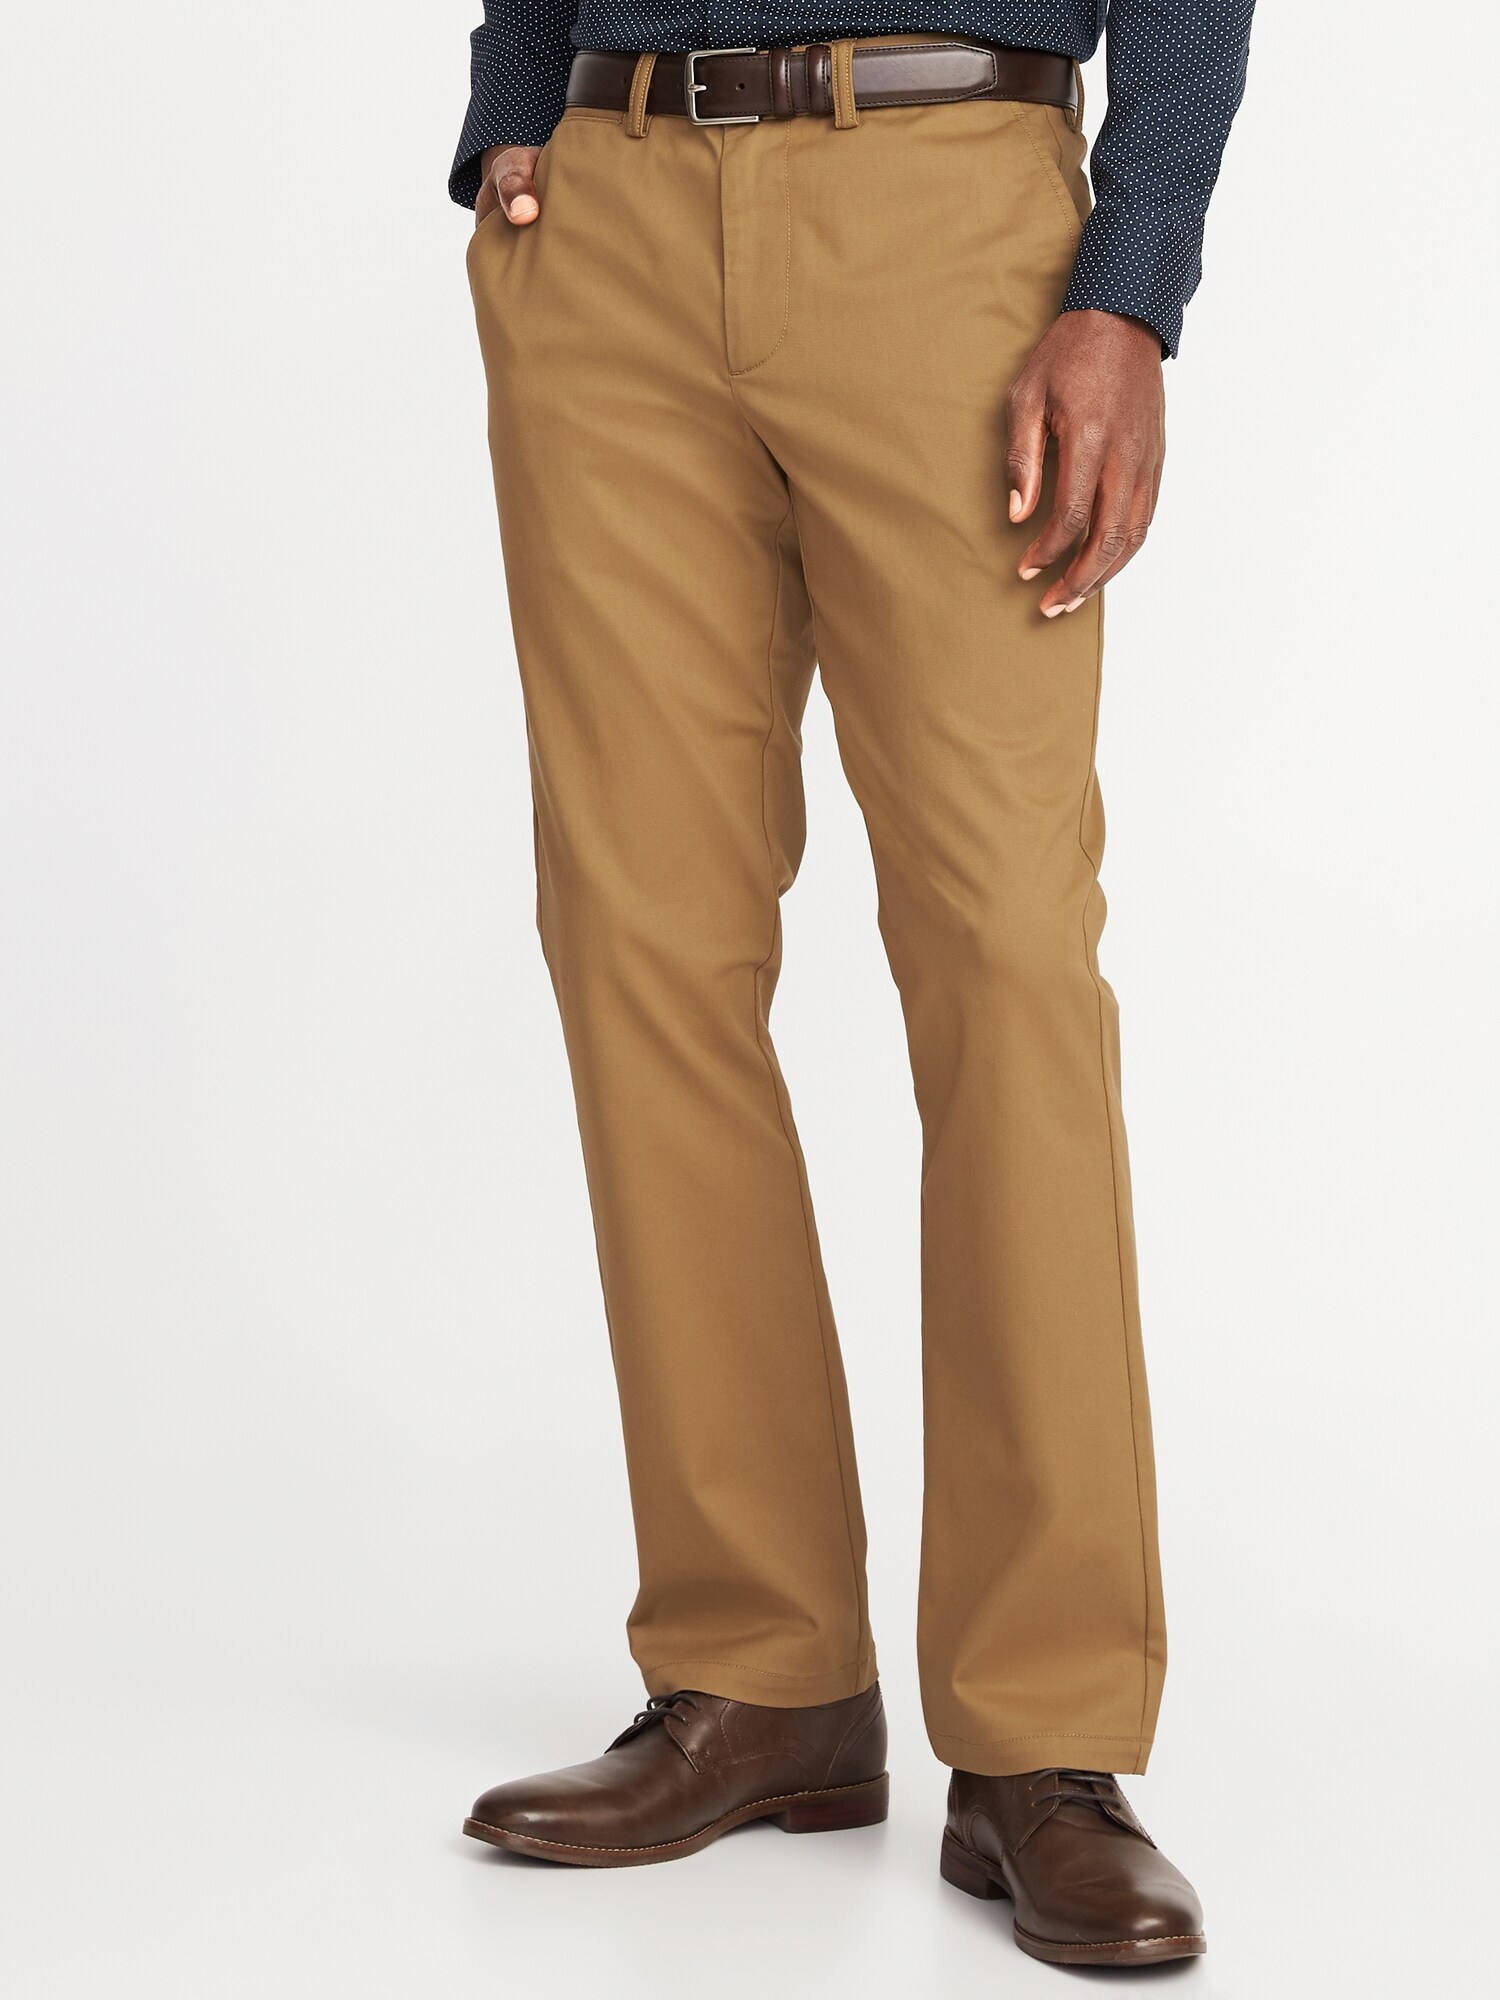 Straight Ultimate Built-In Flex Non-Iron Chinos for Men